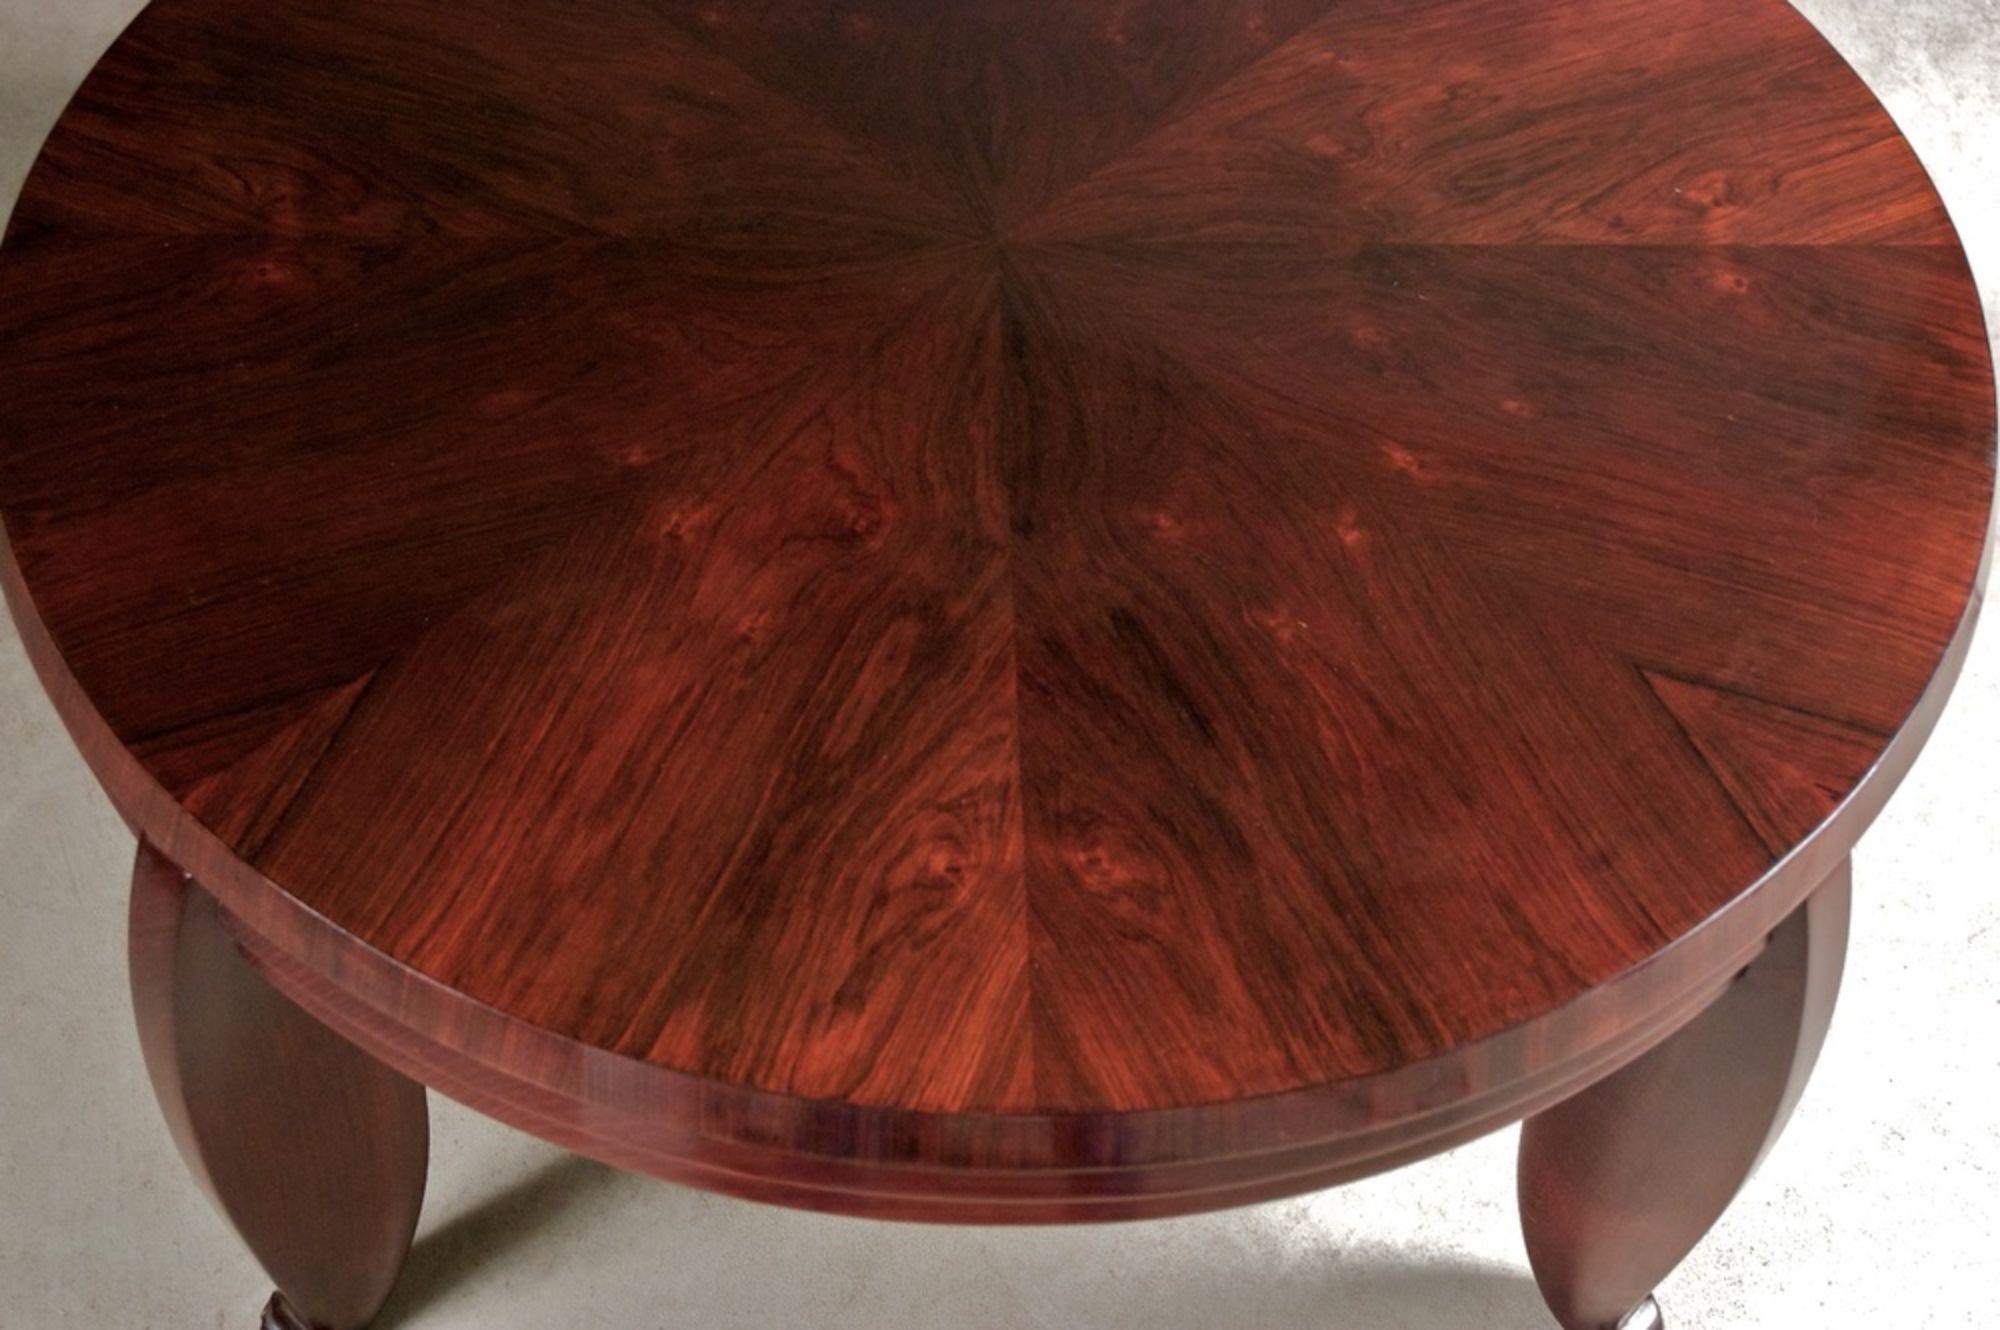 Classic French Art Deco coffee table in Brazilian rosewood. Presented at the 1926 Salon des Artistes Decorateurs in Paris. Measures: 40